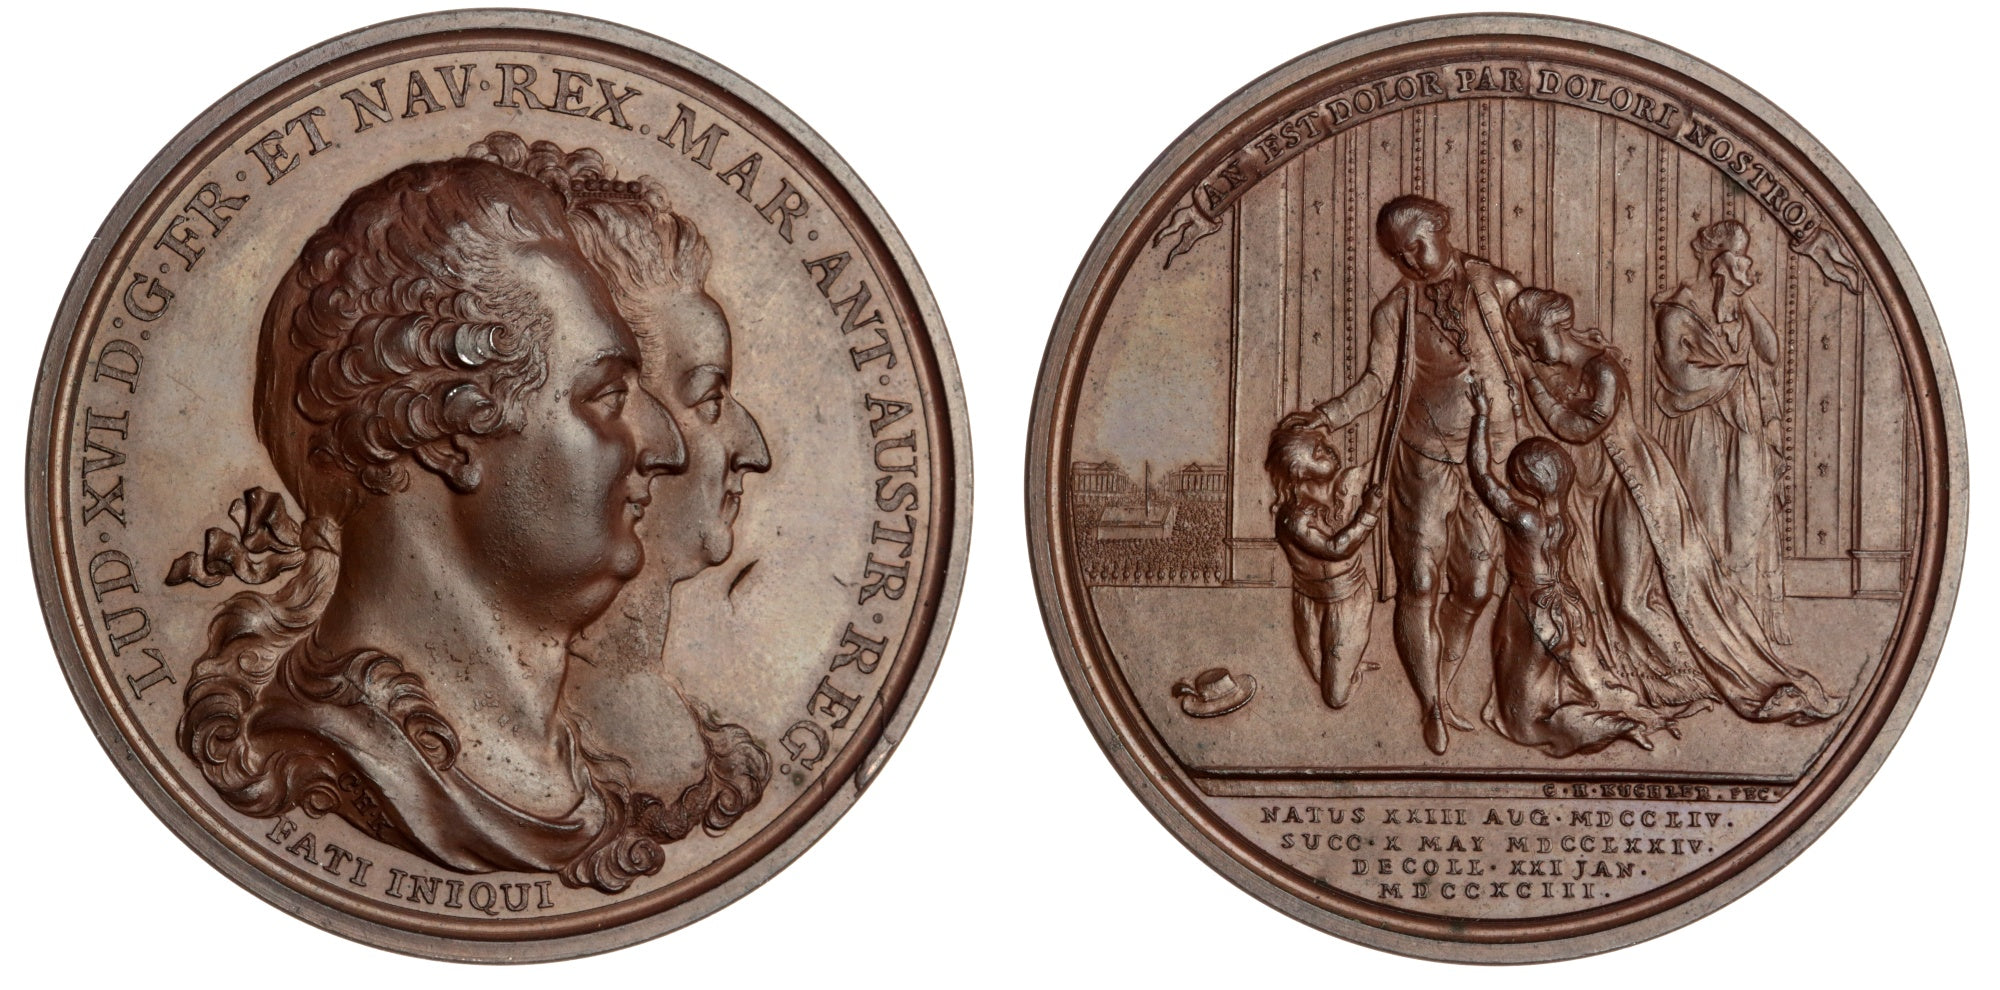 France, Louis XVI, Last Farewell to His Family, AE medal, by C.H. Küchler